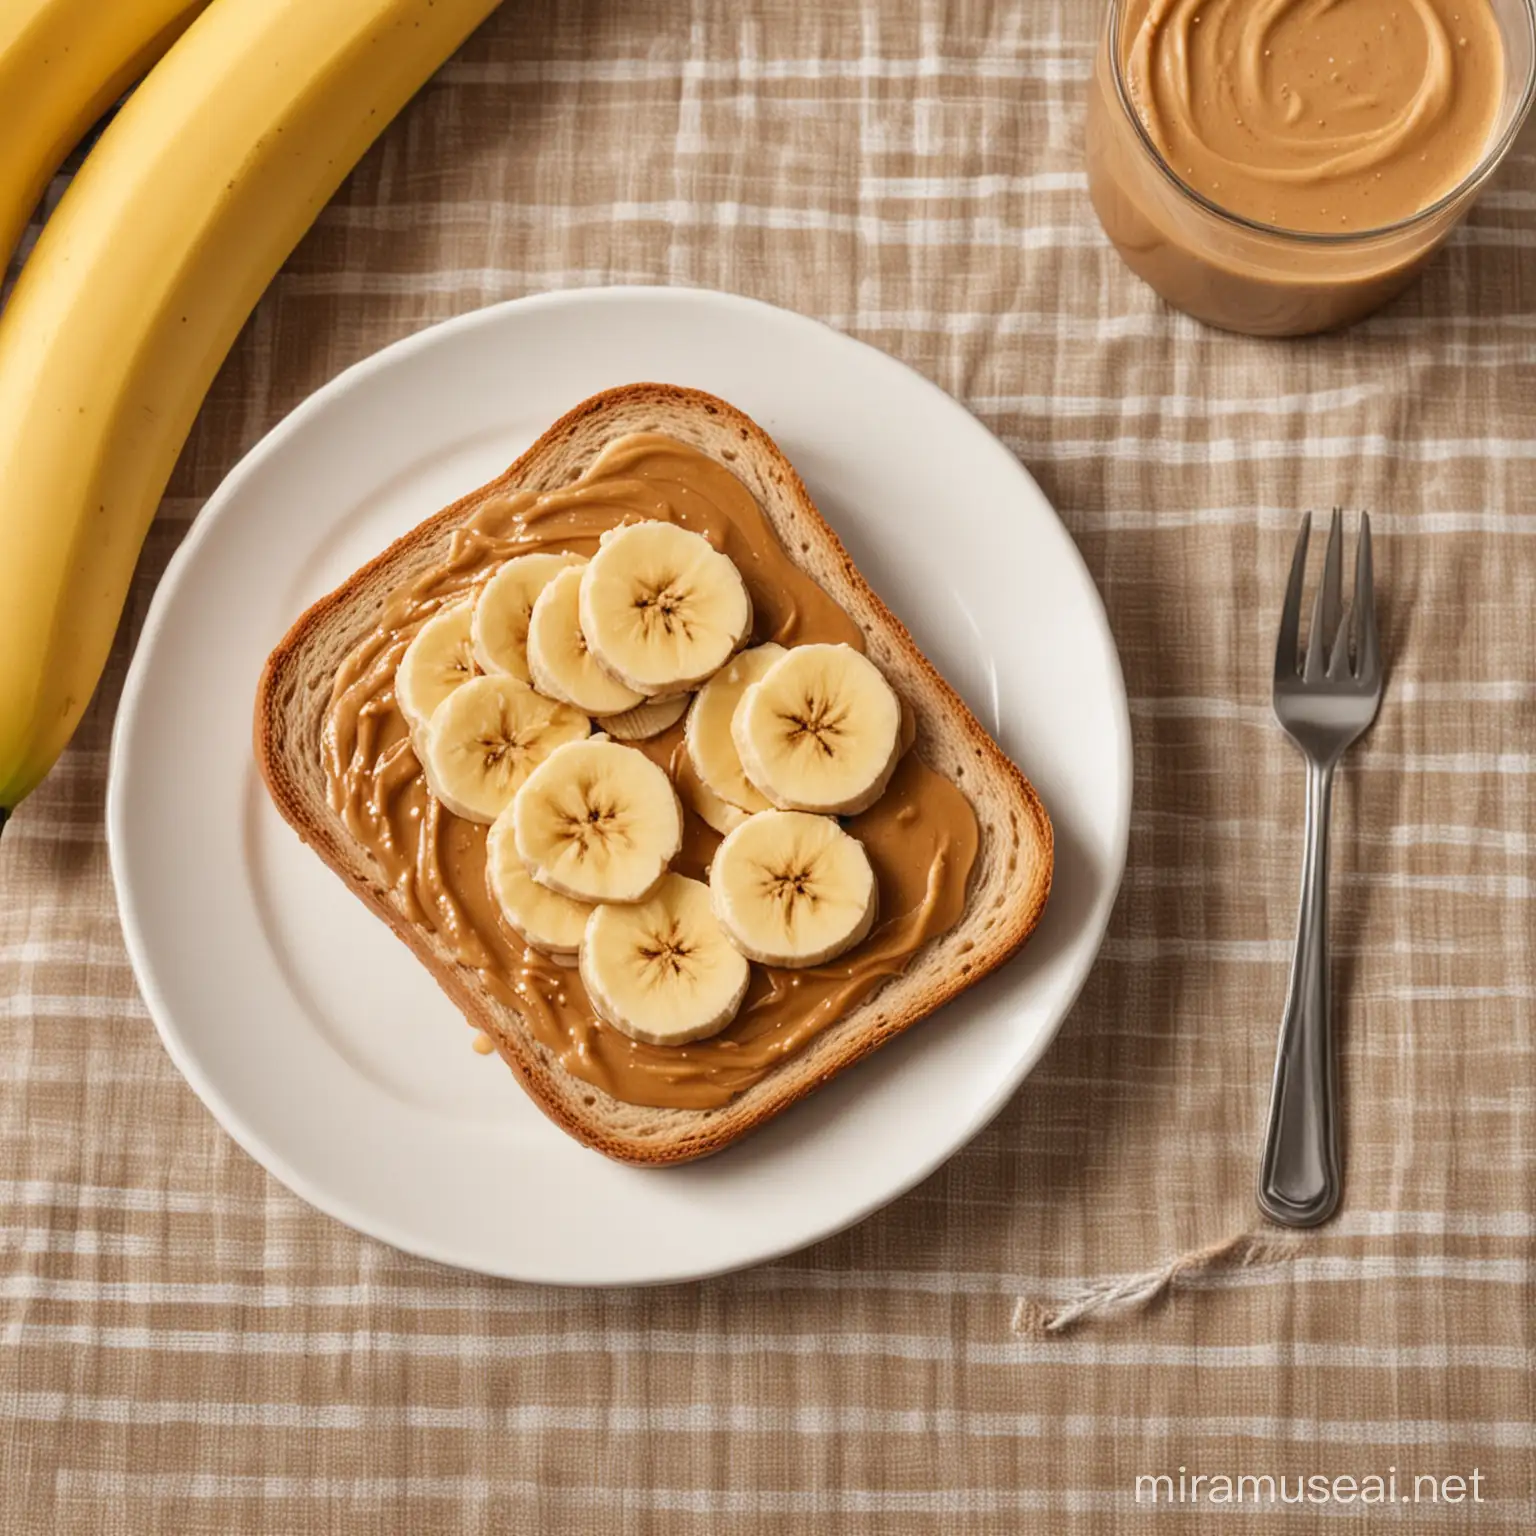 Delicious Peanut Butter and Banana Toast on Elegant Table Setting